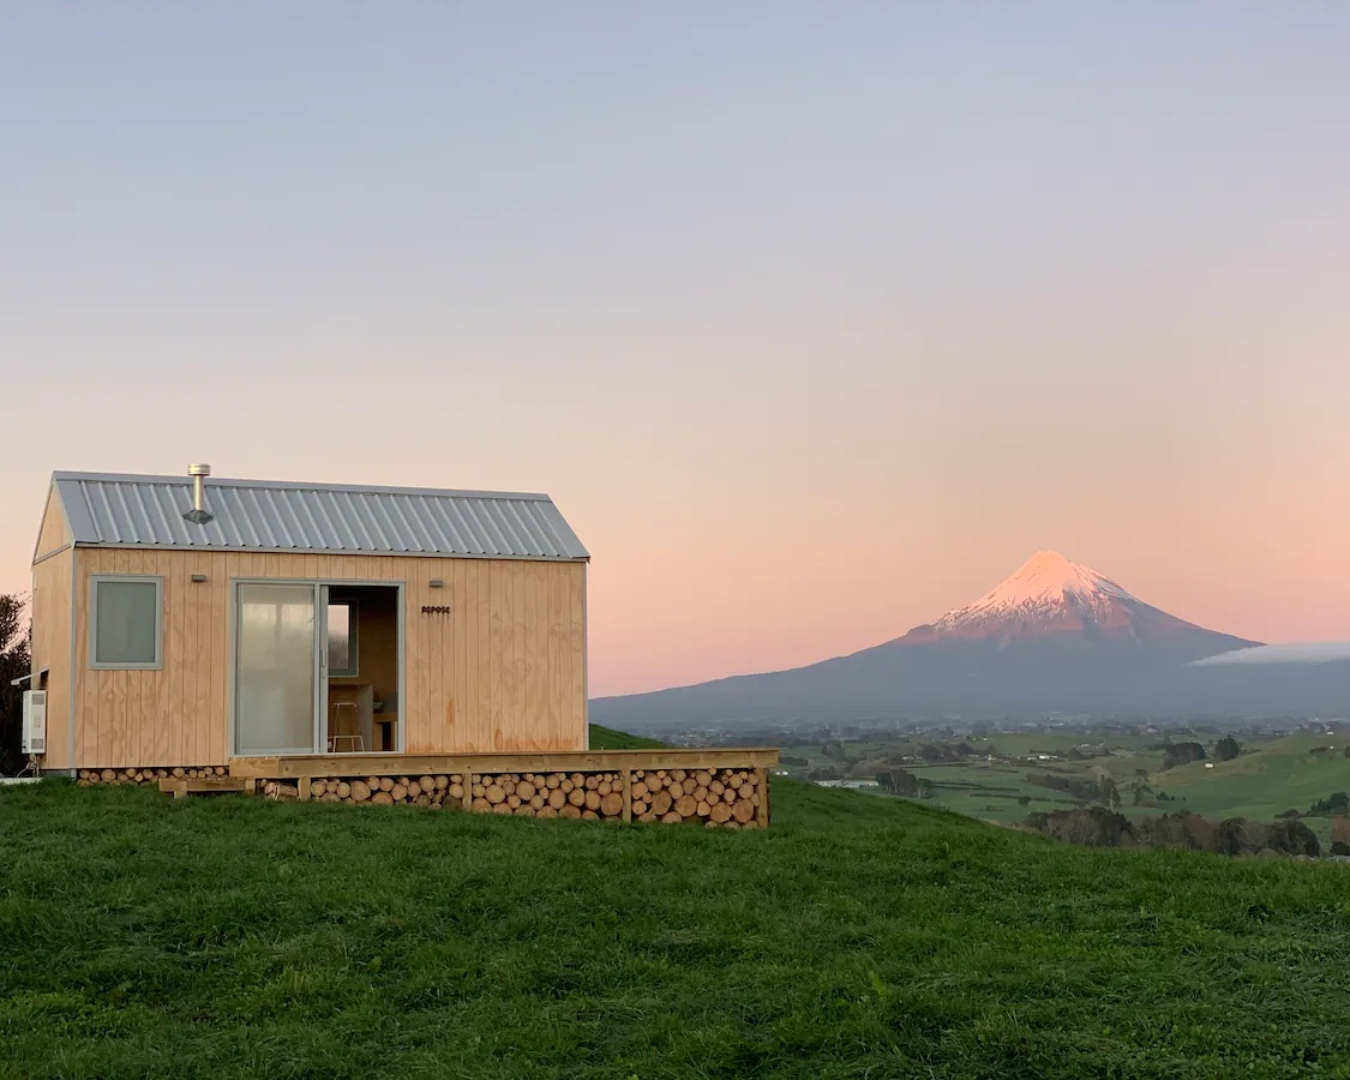 Embodying tranquility, the Repose x Lepperton Farm Stay cabin sits on a lush green hill facing Mount Taranaki